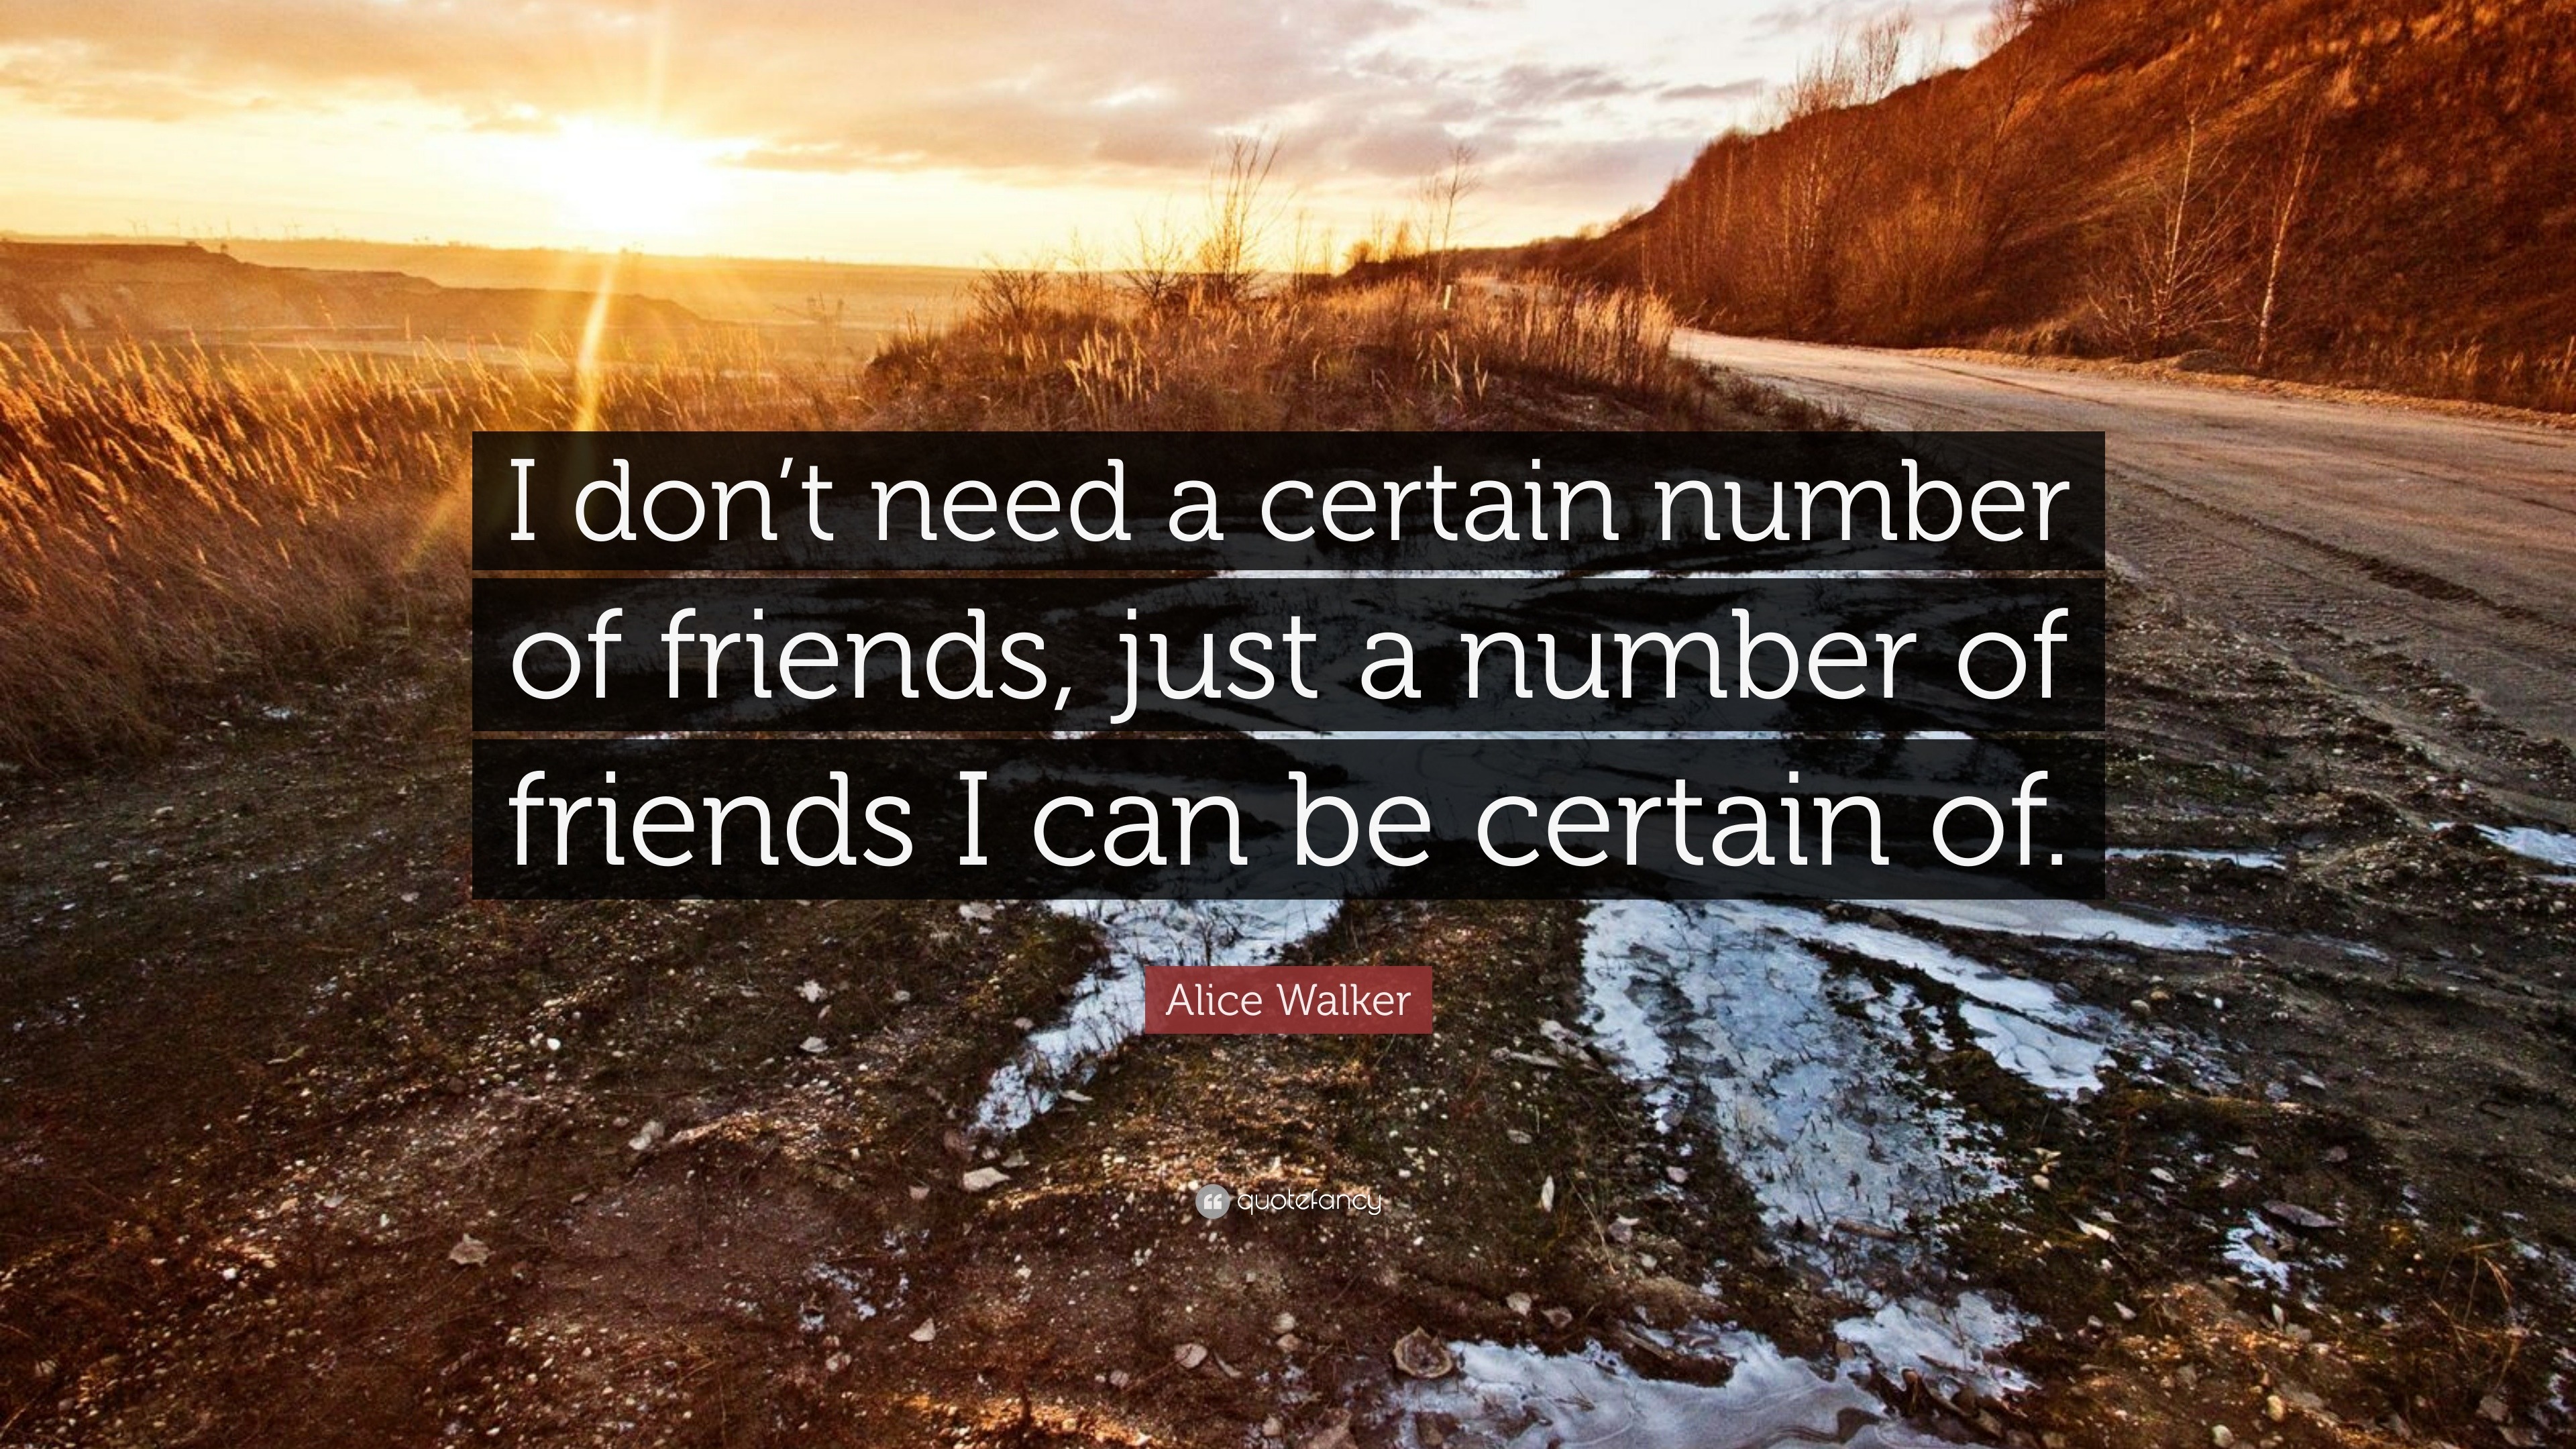 Alice Walker Quote: "I don't need a certain number of friends, just a ...